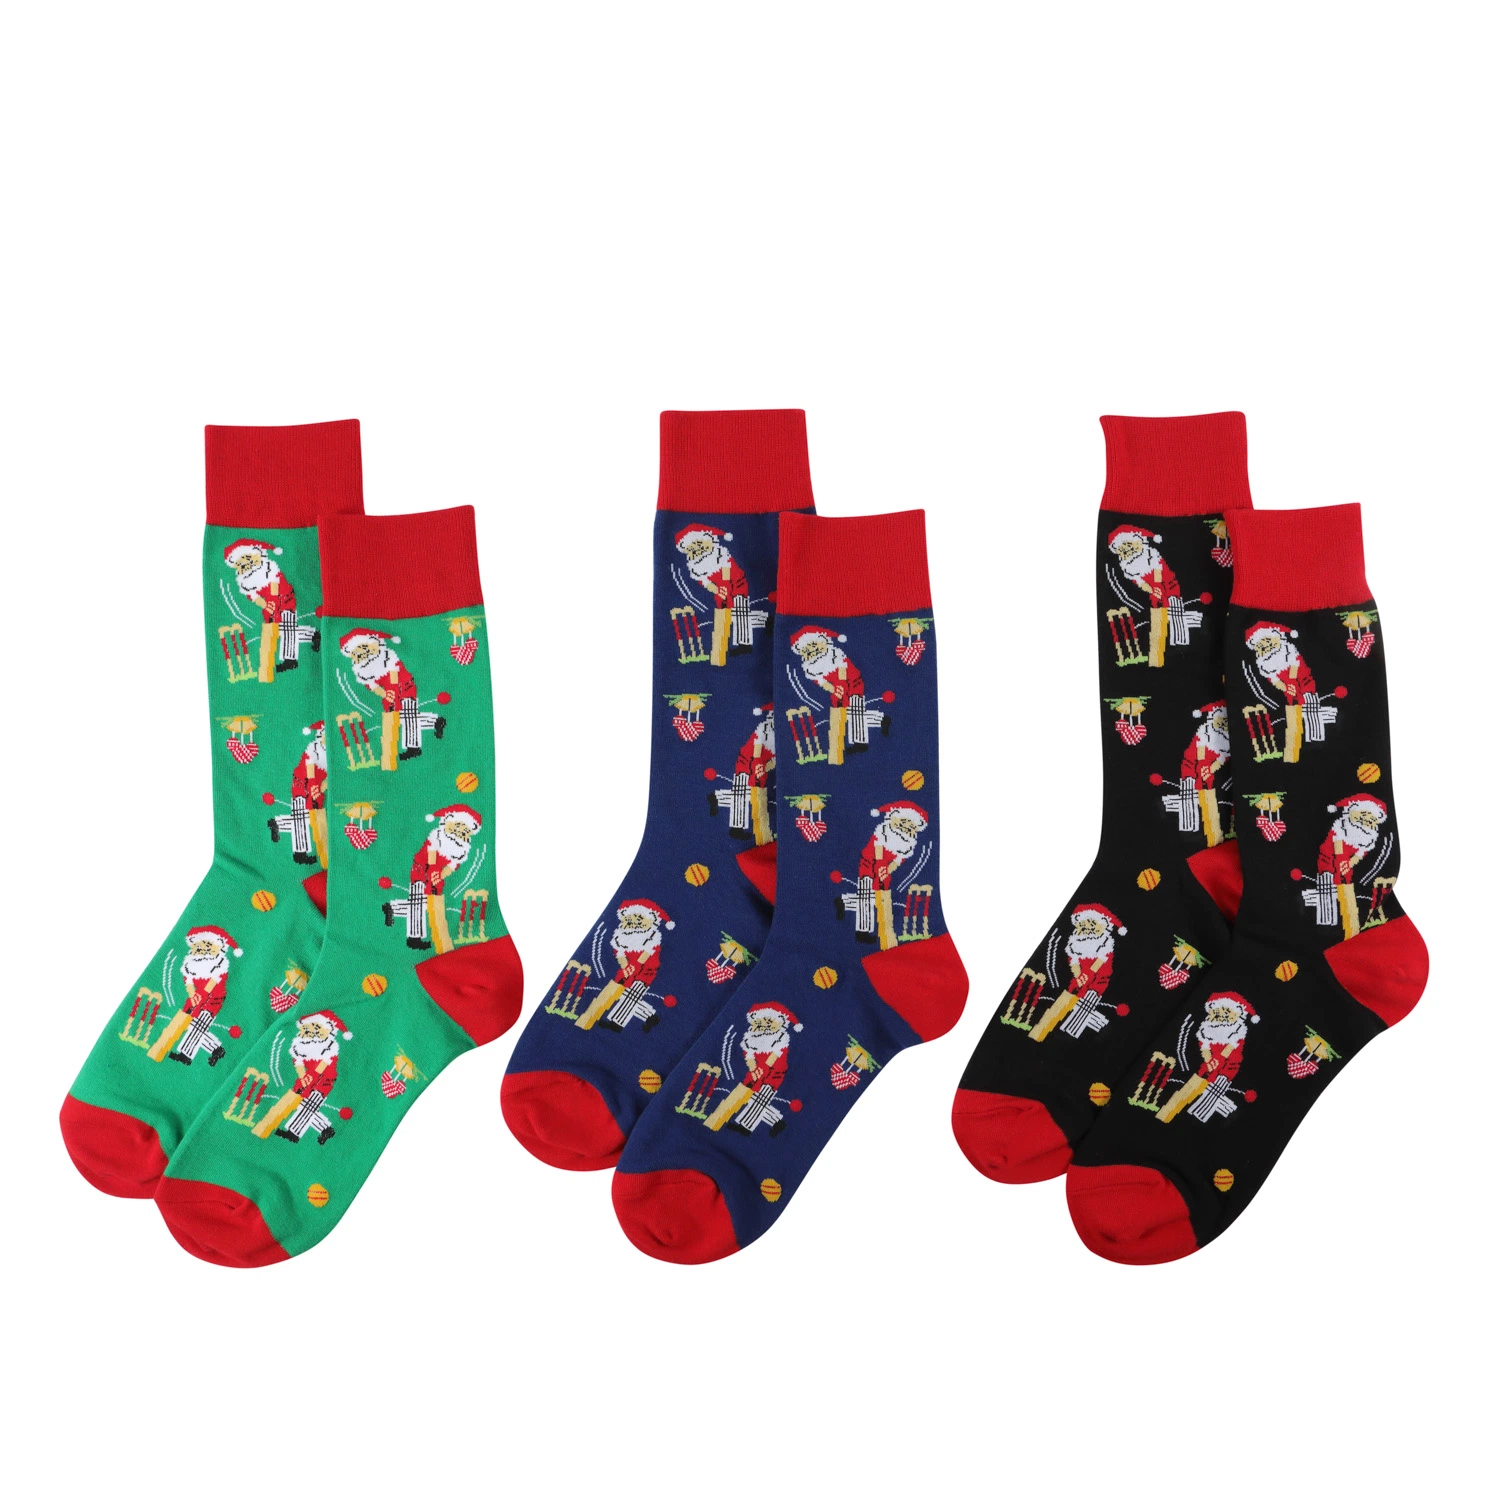 Socks Custom Made Funny Colorful Cotton Bamboo Cool Business Bright Colored Men Socks